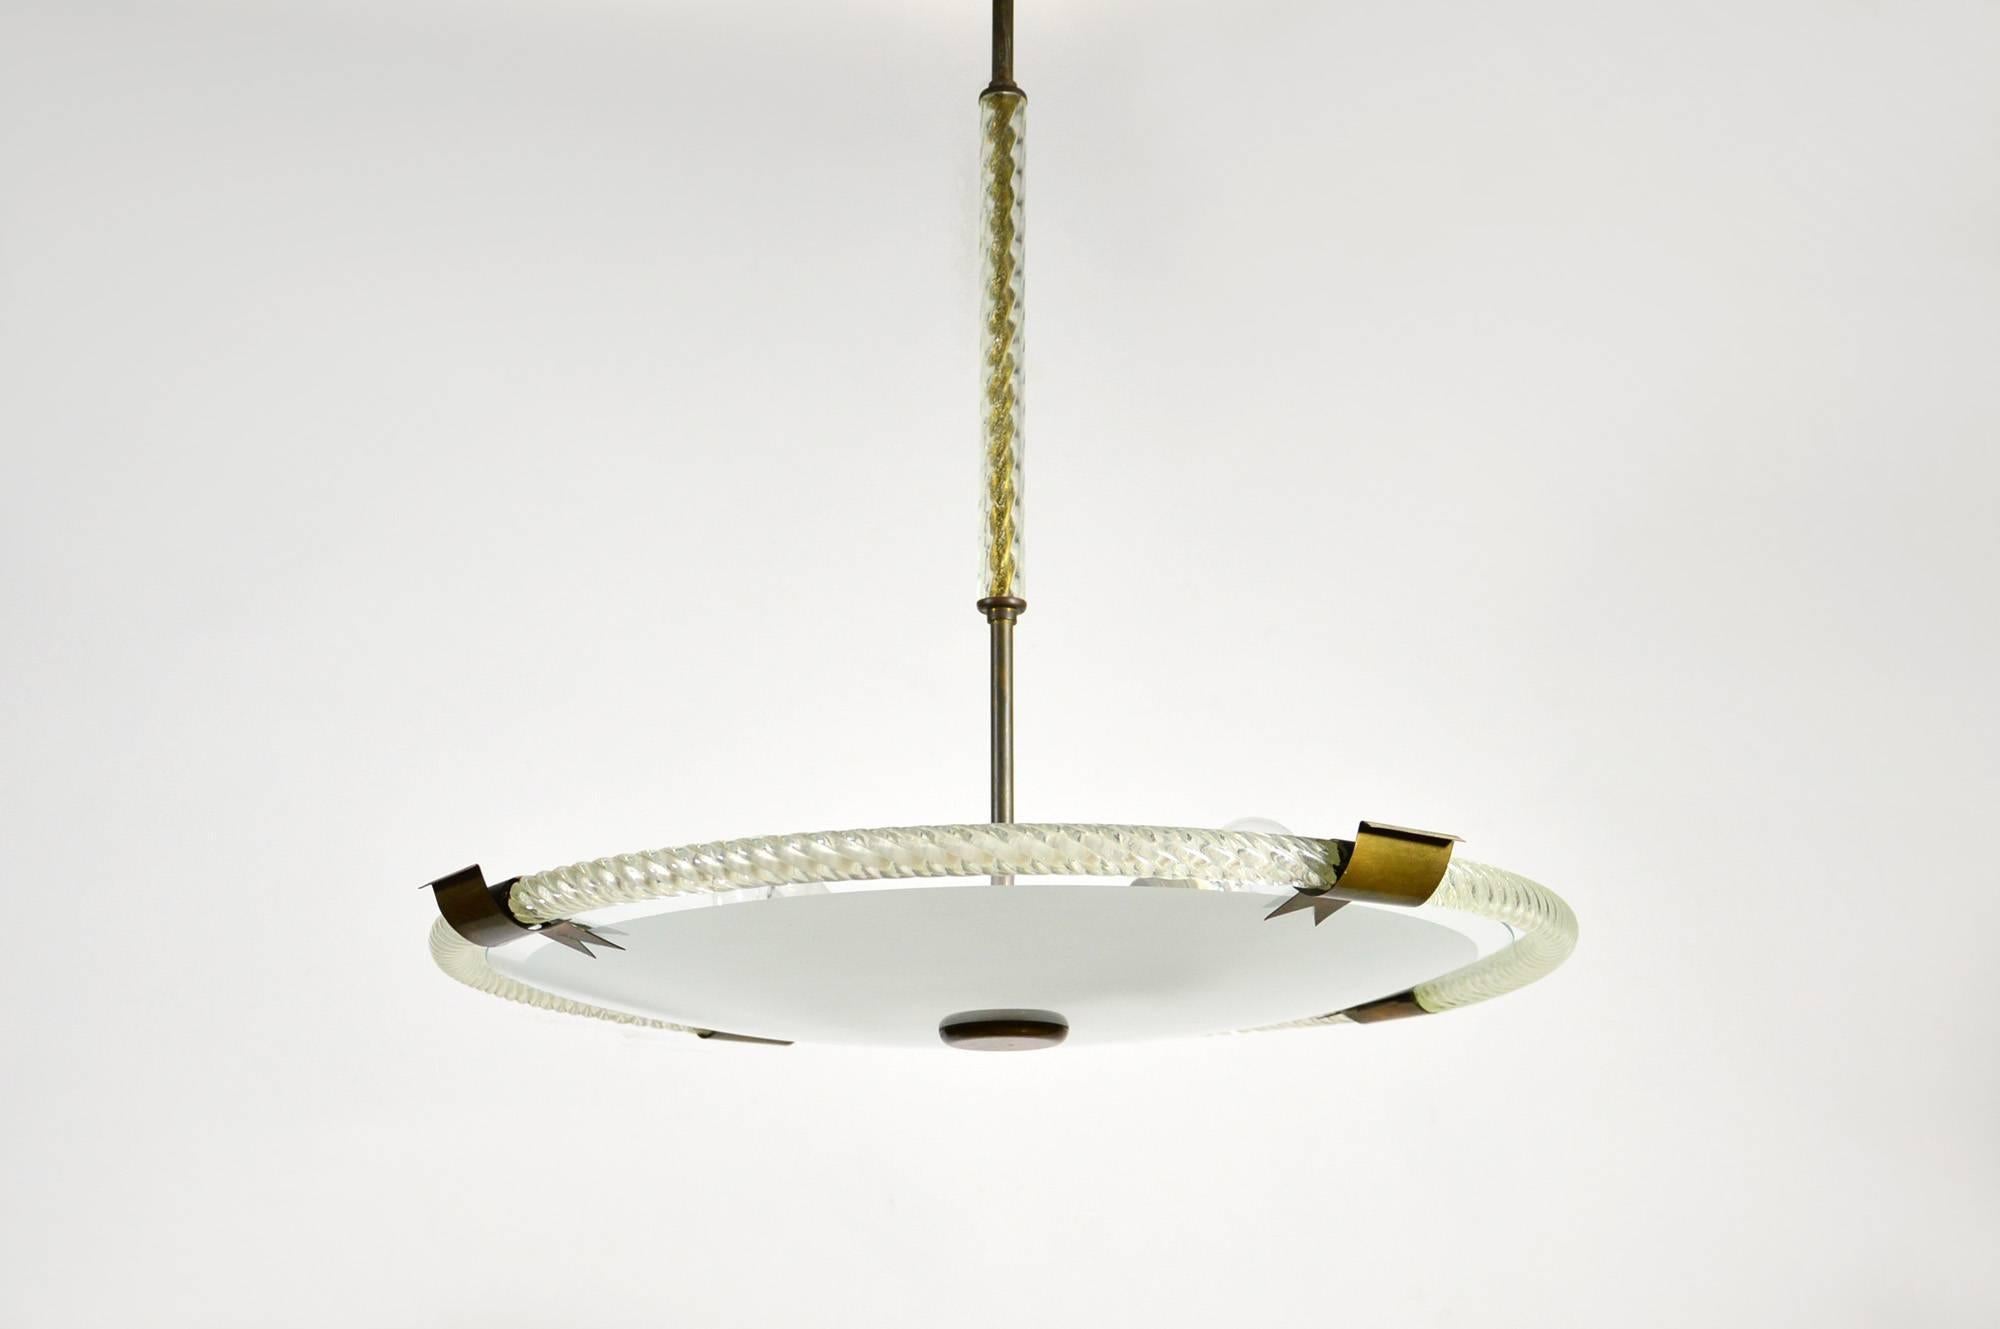 A Murano glass pendant with brass fittings. It features a sandblasted glass disc surrounded by a 